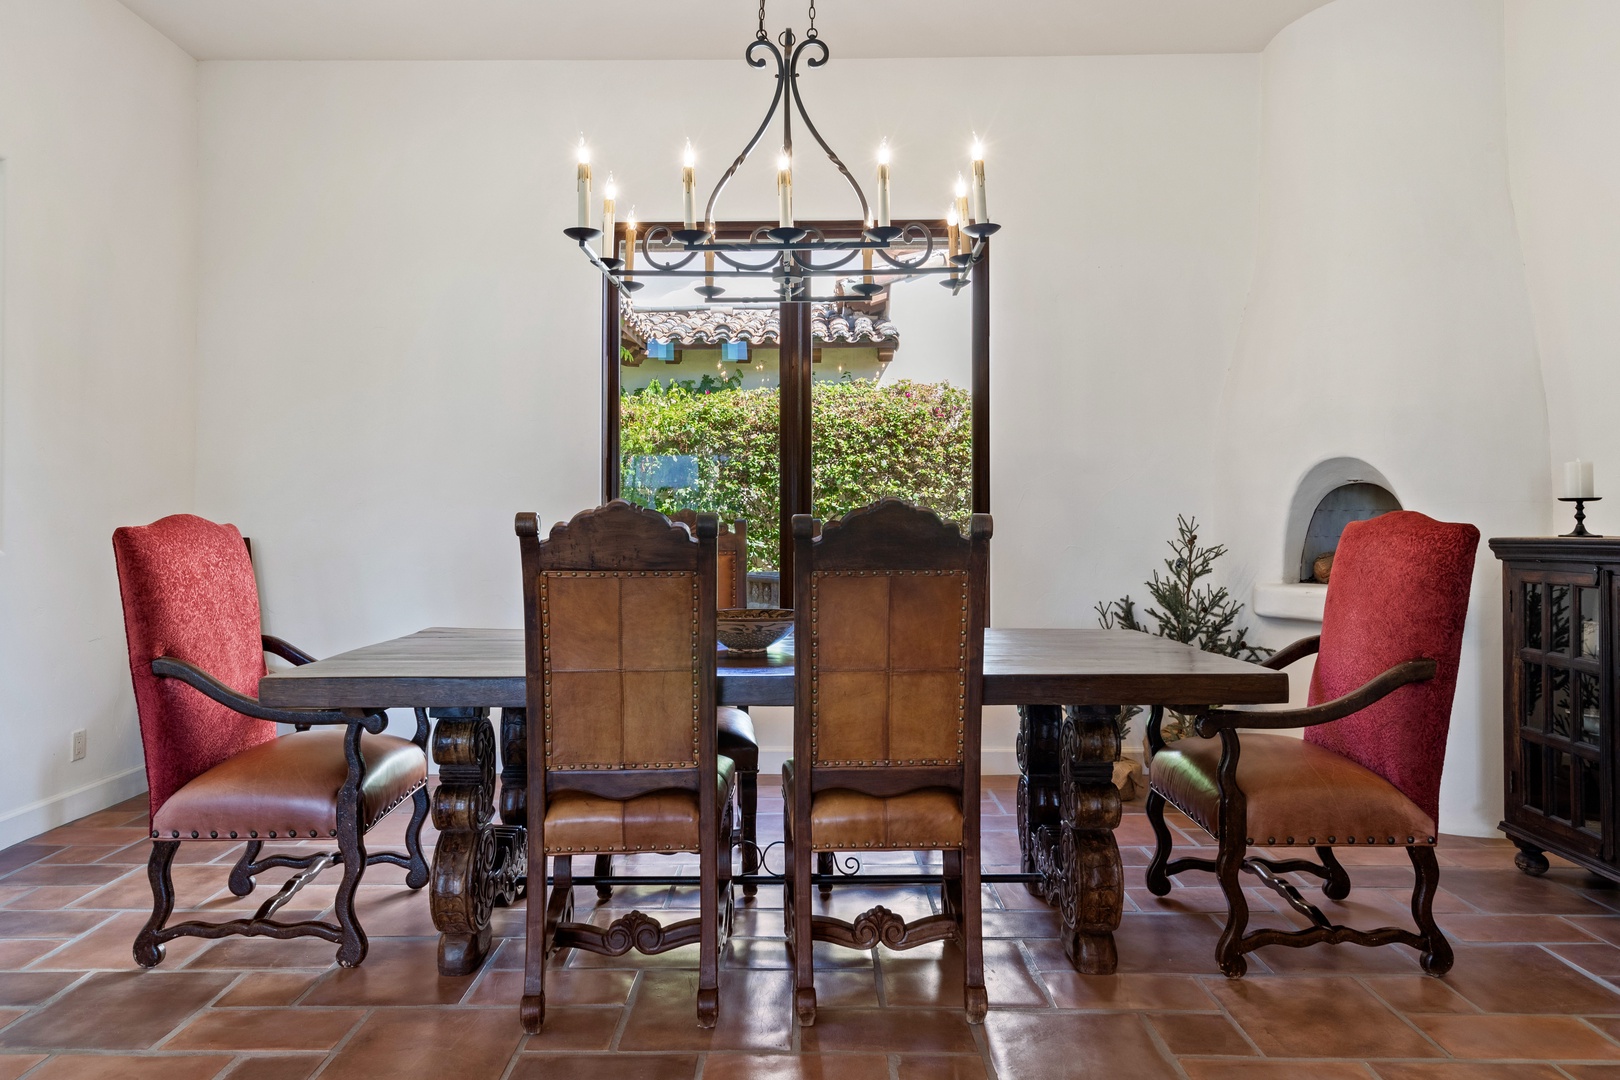 Dining room table with seating for up to 8 guests